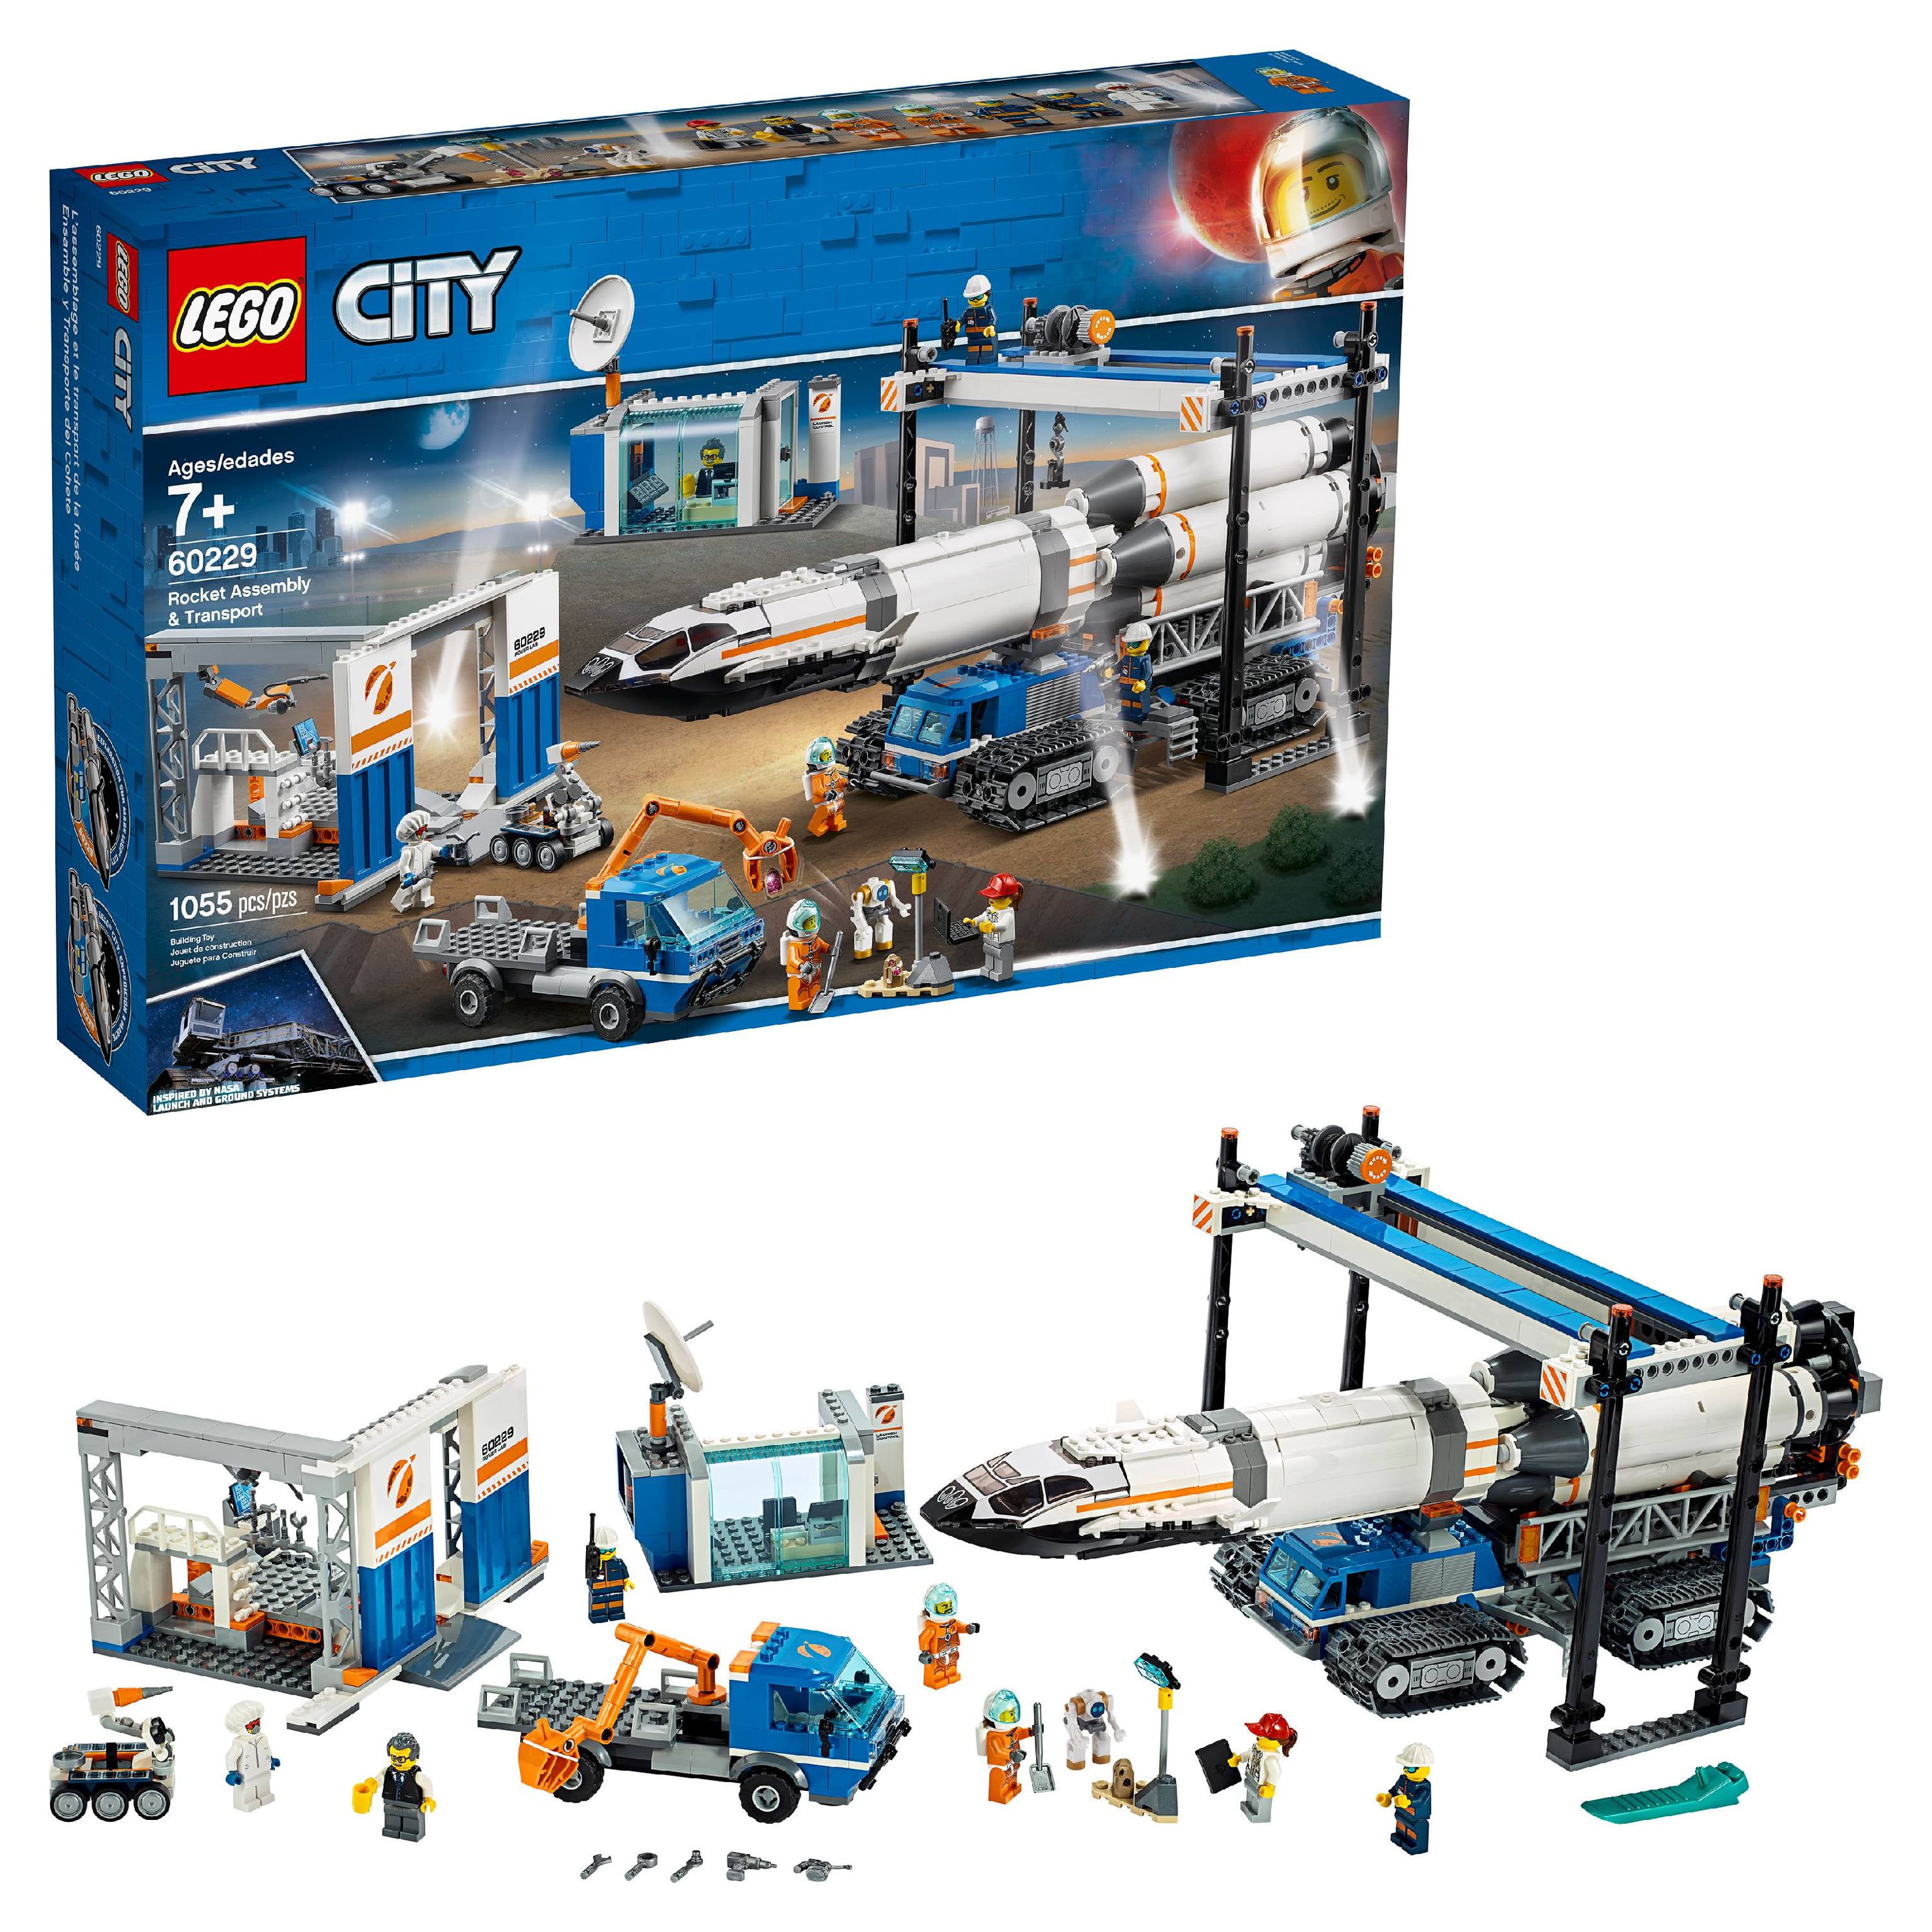 LEGO City Space Rocket Assembly & Transport 60229 Toy Set (1055 Pieces) - image 1 of 8